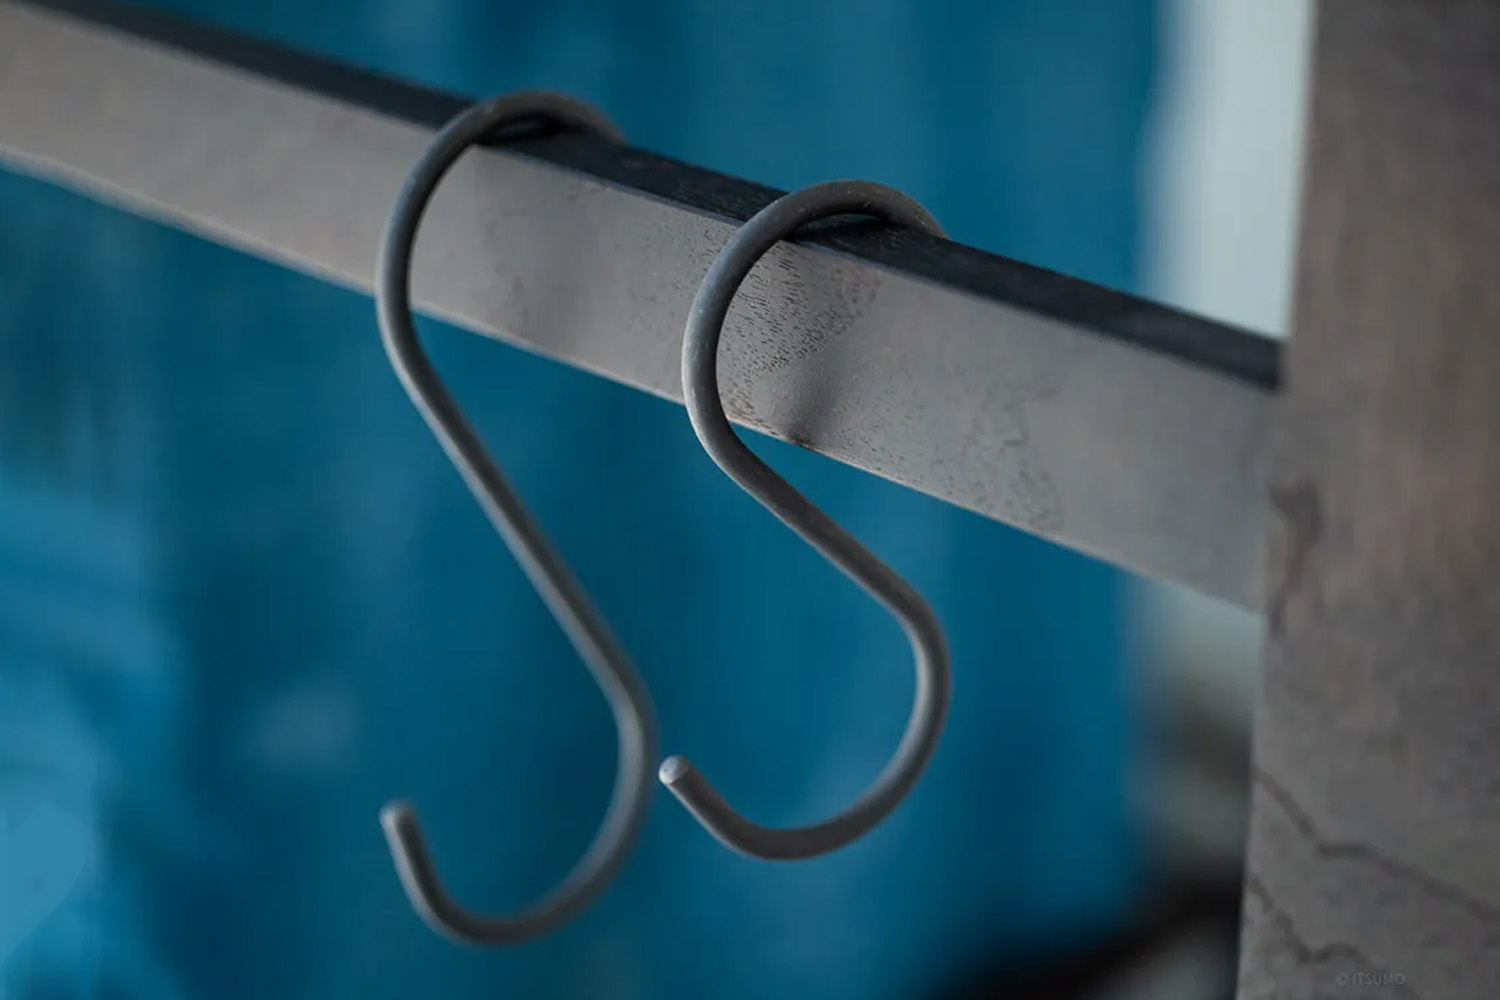 the japanese small iron hooks are \$6.\13 each at itsumo. 16